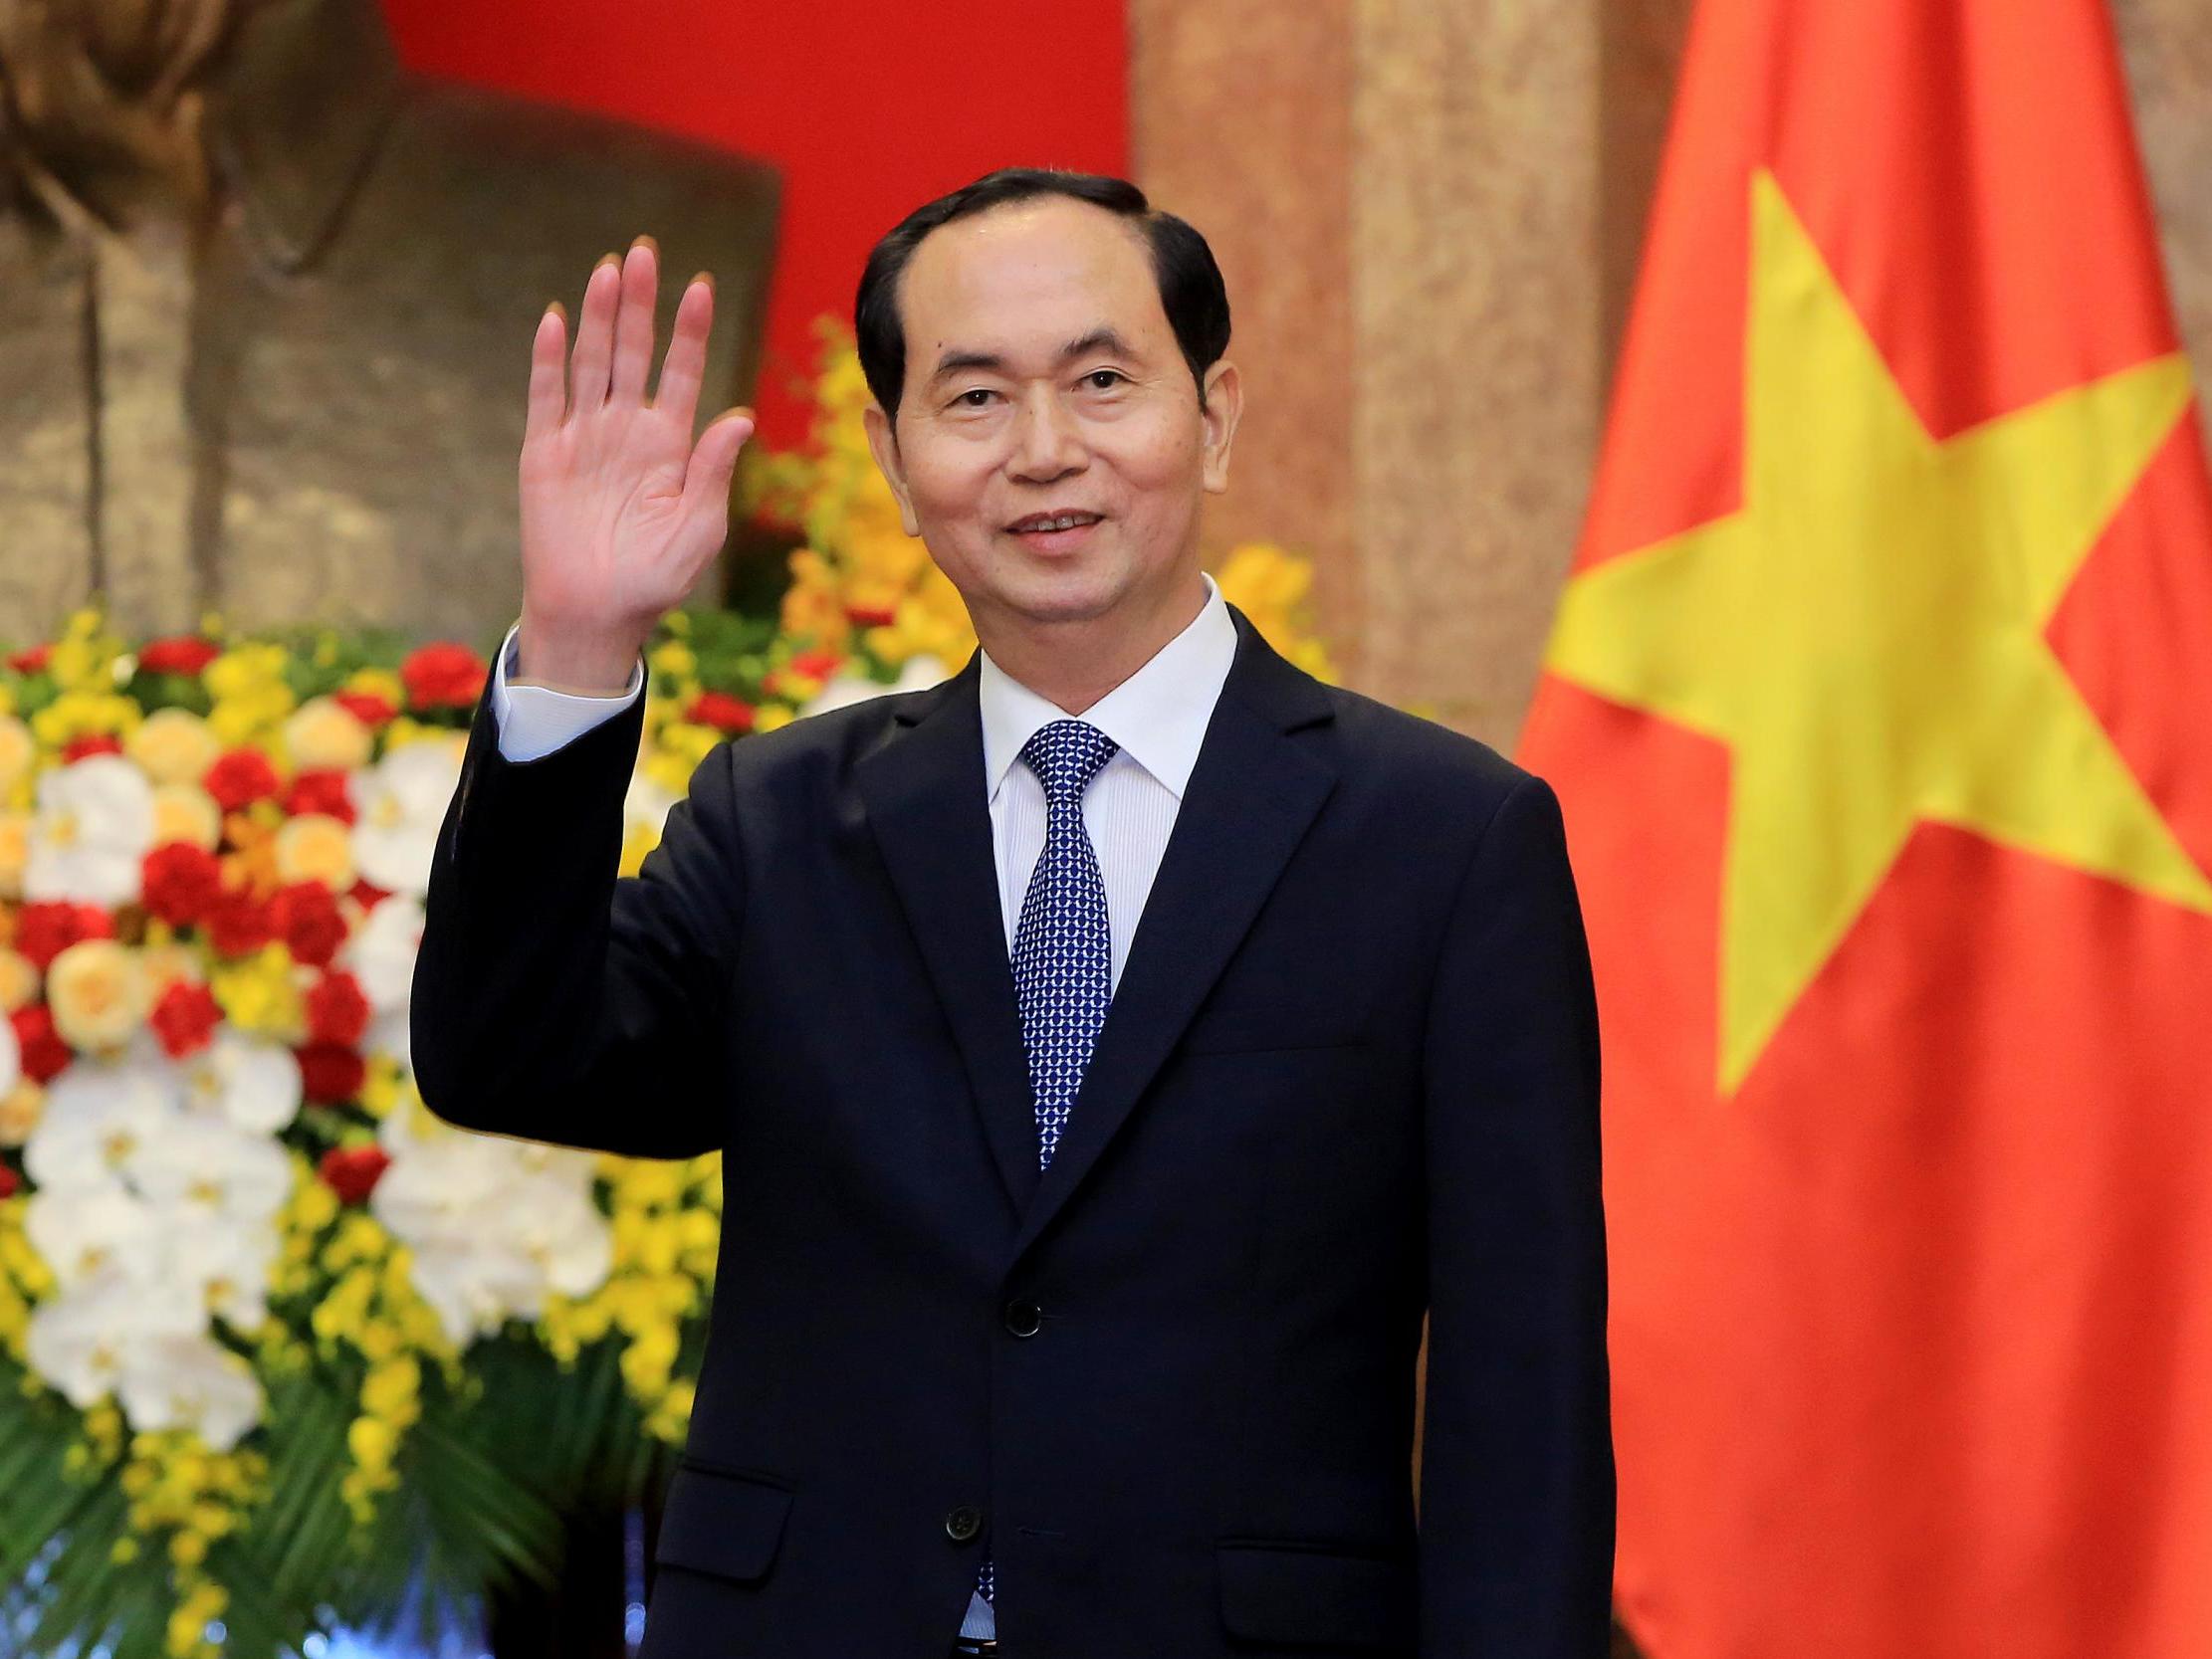 Vietnamese President Tran Dai Quang at the Presidential Palace in Hanoi on March 23, 2018. (MINH HOANG/AFP/Getty Images)